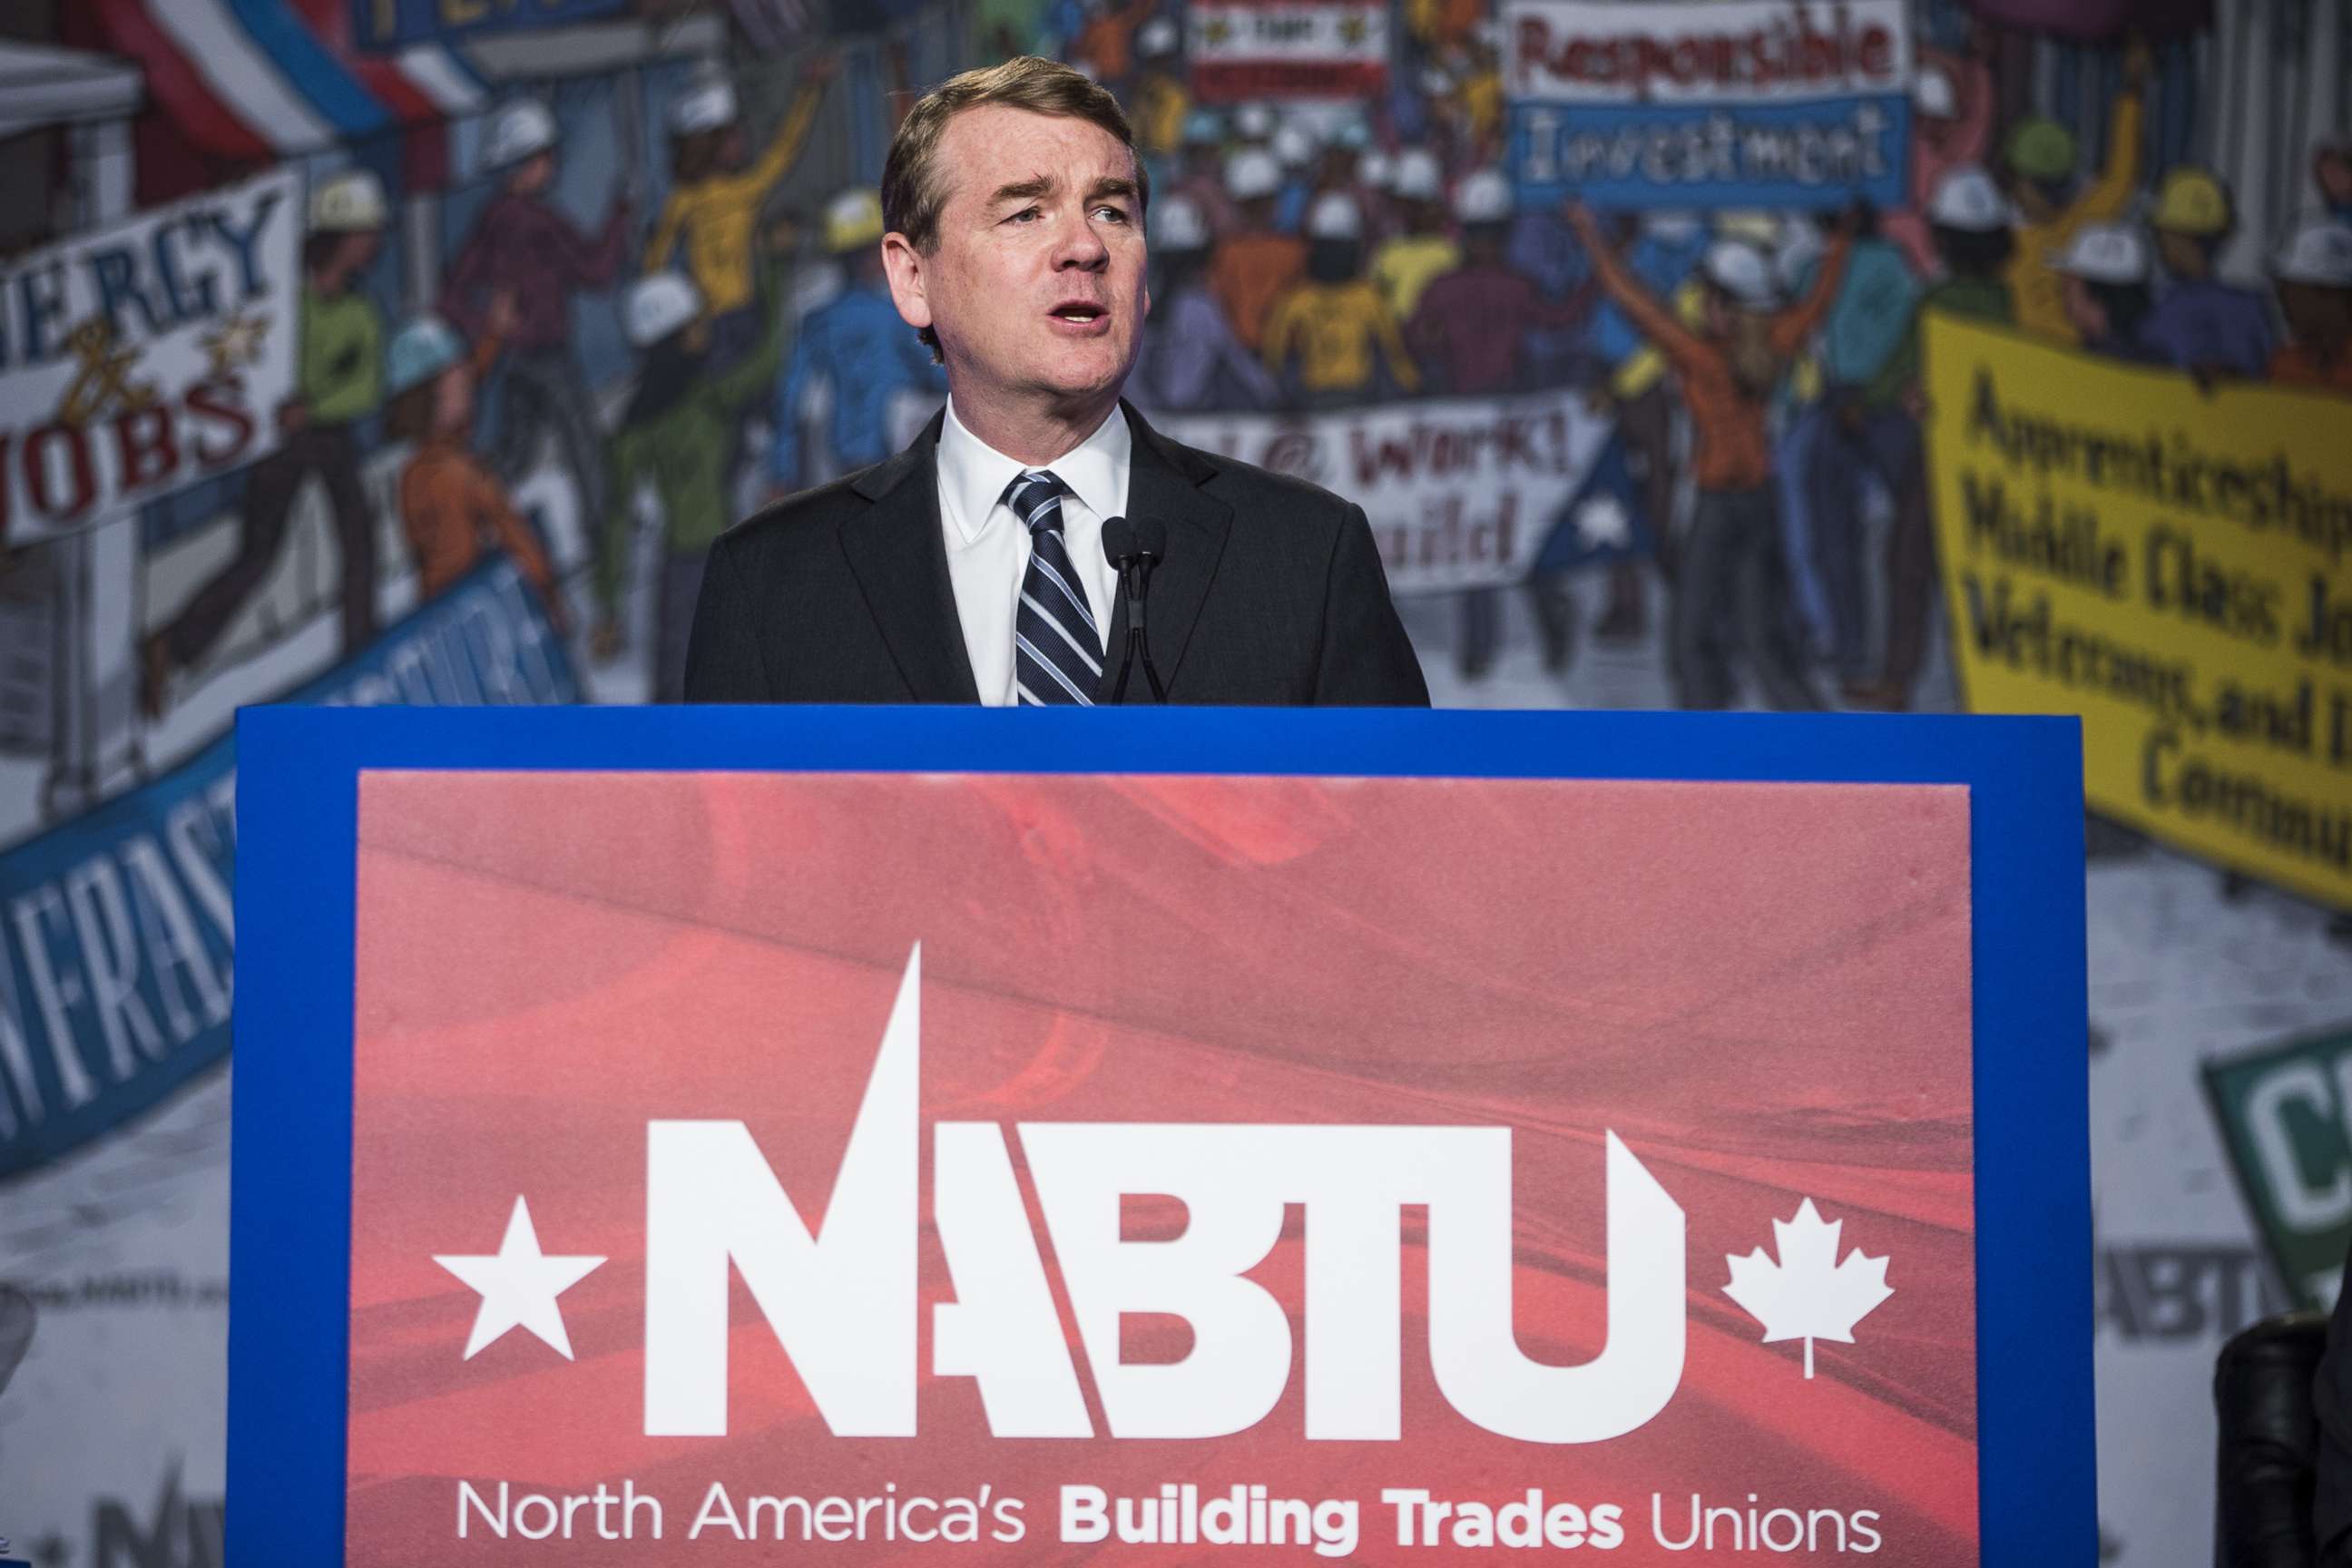 PHOTO: Sen. Michael Bennet speaks during the North American Building Trades Unions Conference in Washington, D.C., April 10, 2019.